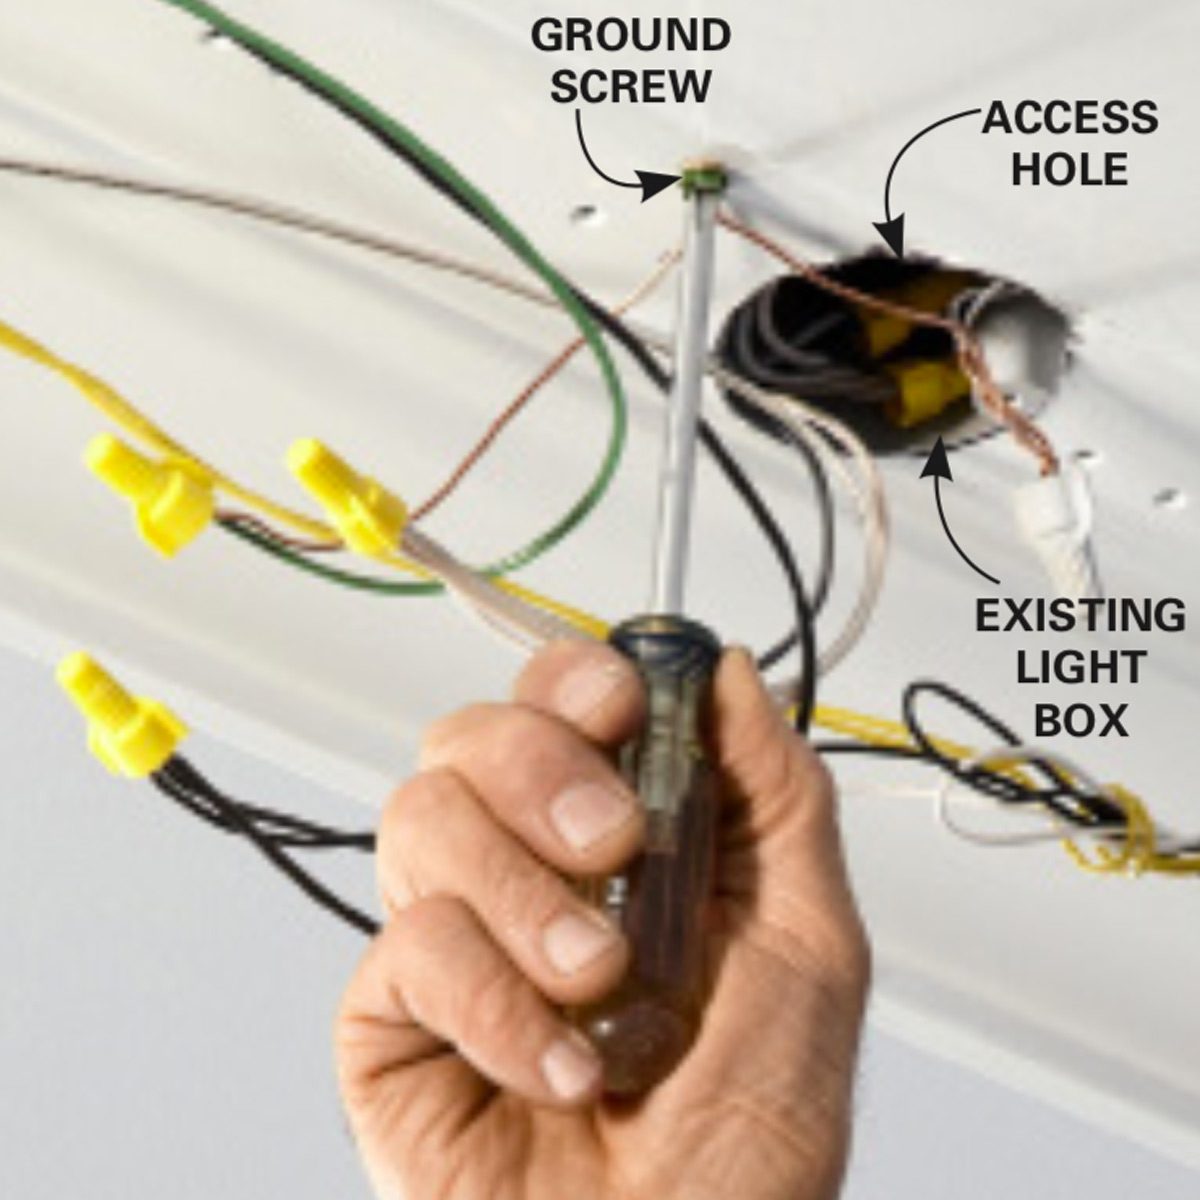 how to properly ground a light fixture in a garage